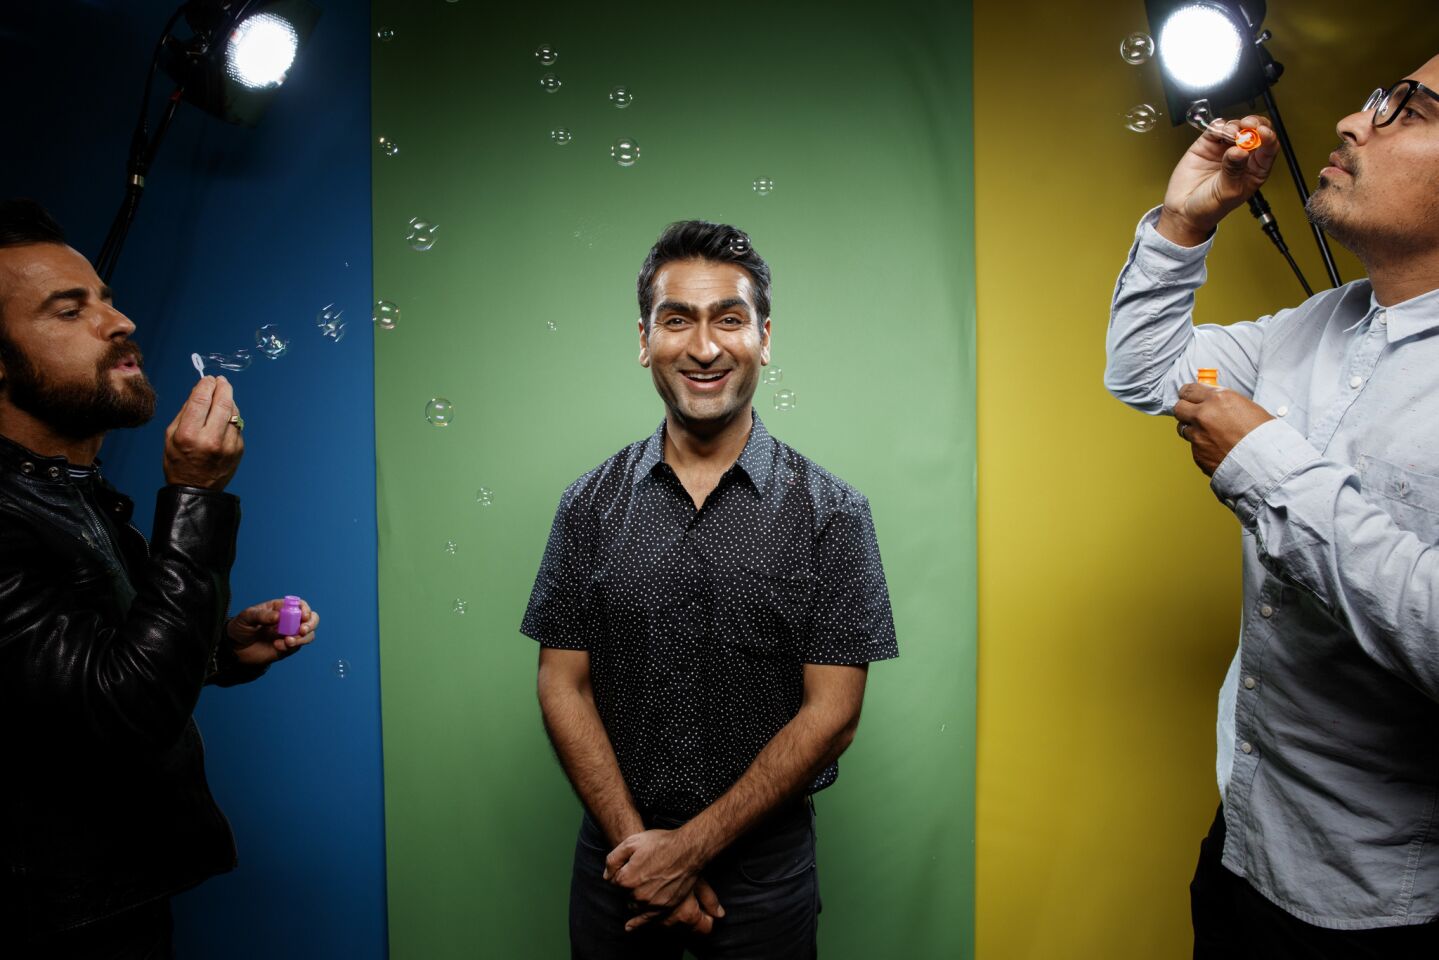 Justin Theroux, Kumail Nanjiani, and Michael Pena, from the film "The Lego Ninjago Movie," photographed in the L.A. Times photo studio at Comic-Con 2017.